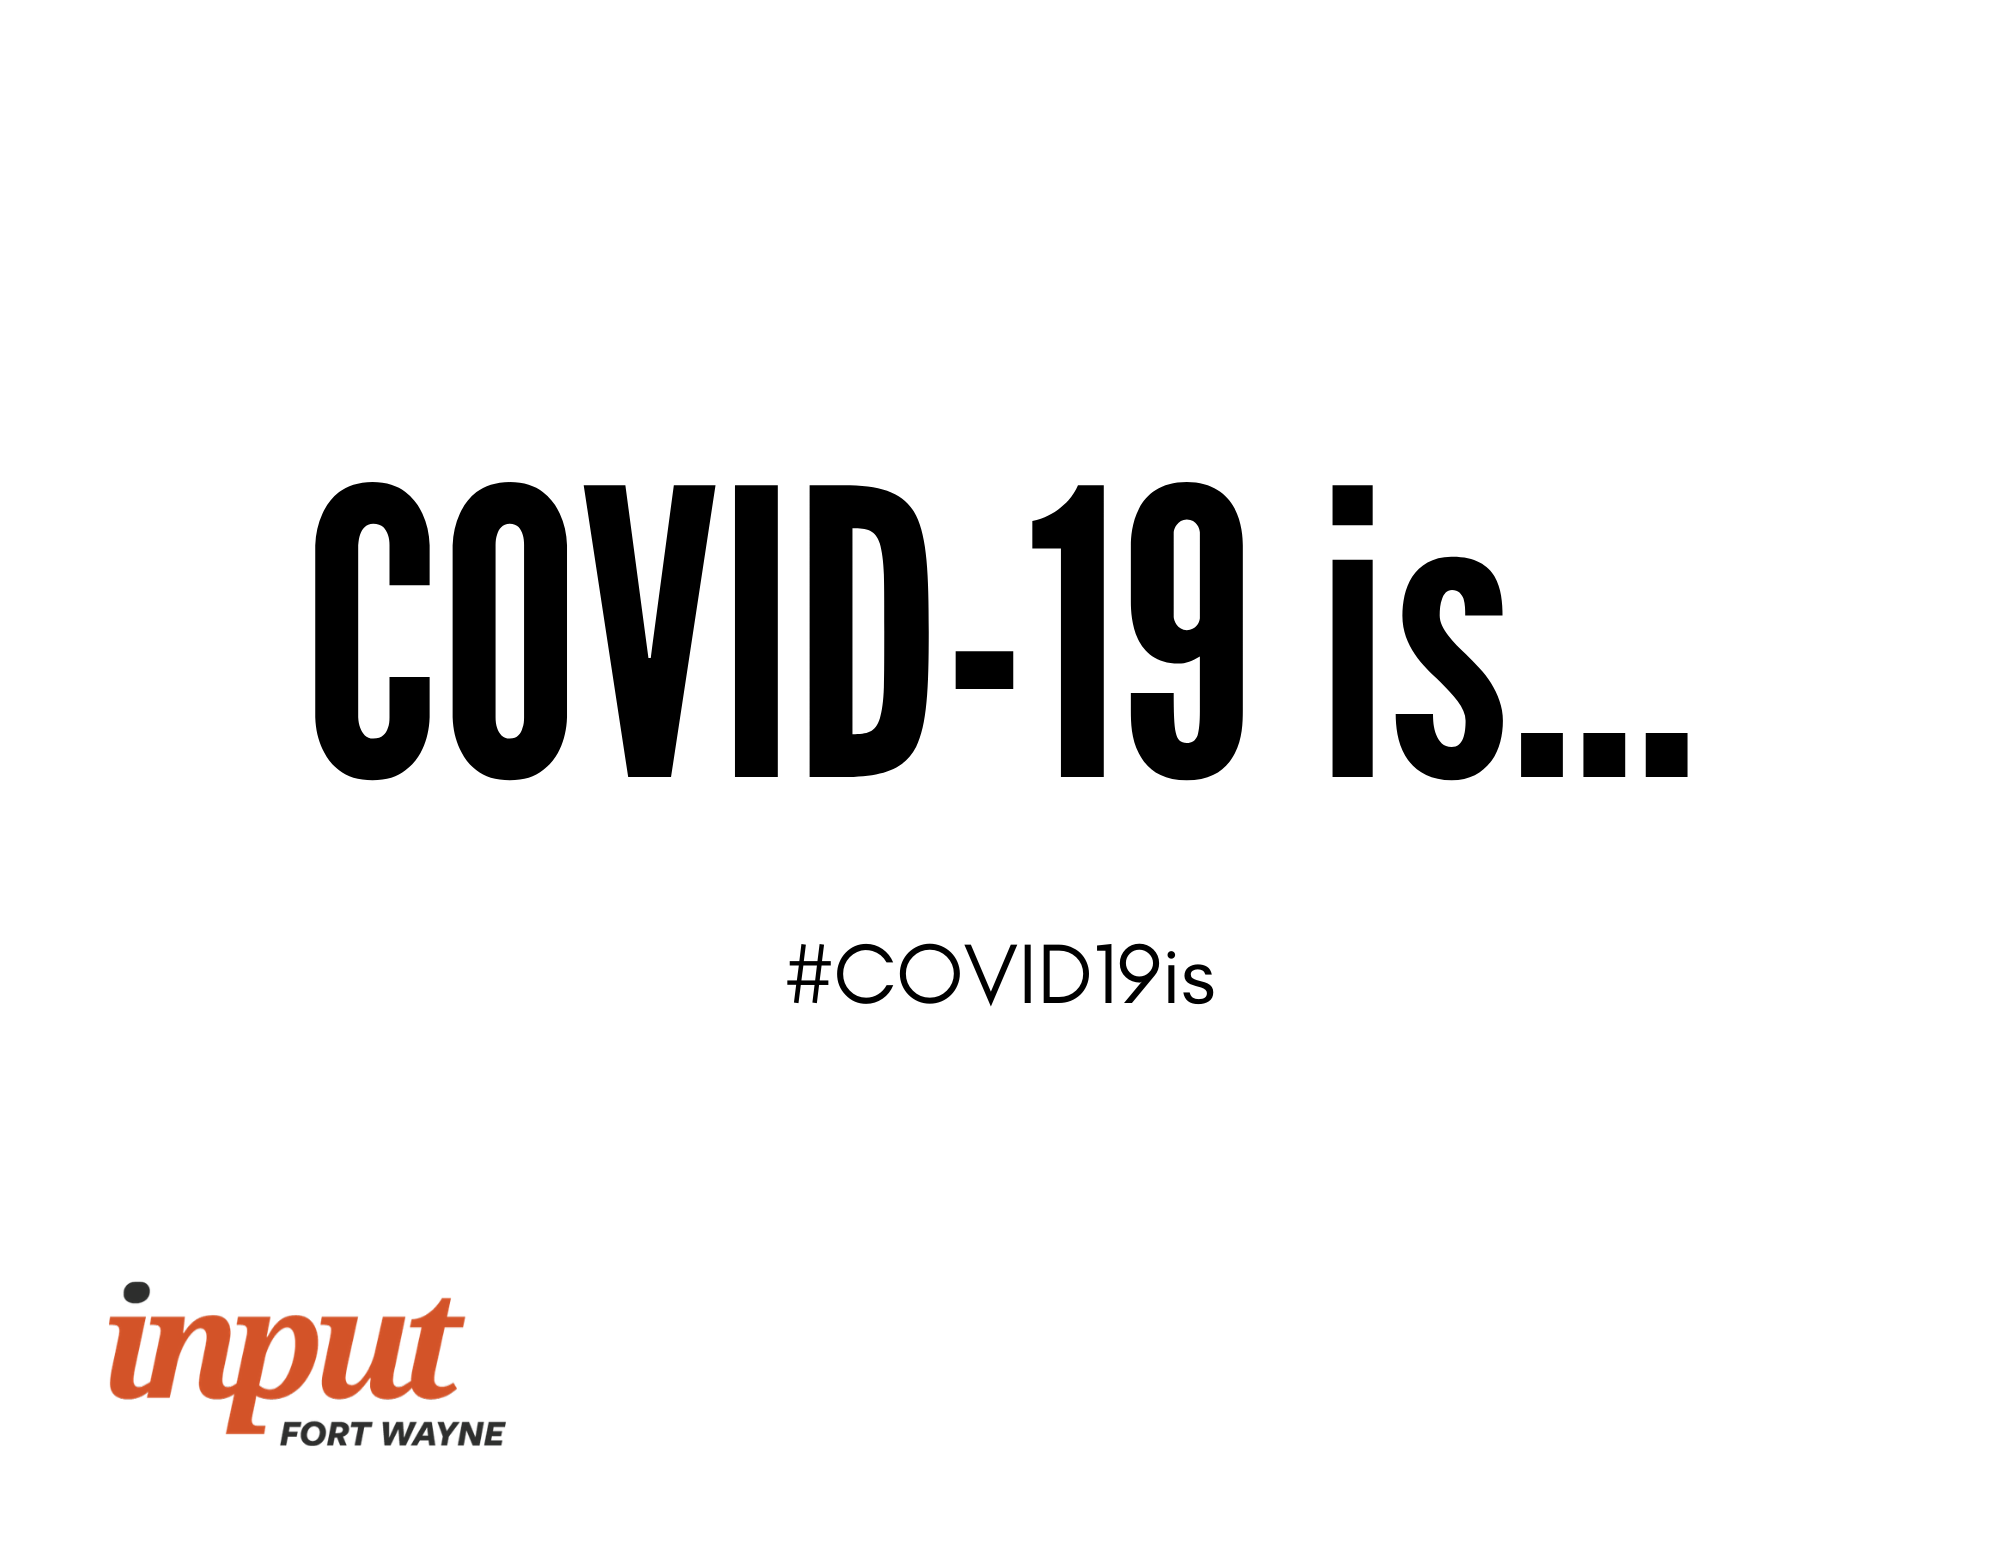 What is COVID-19 like for you? Tell us all about it in this creative exercise.